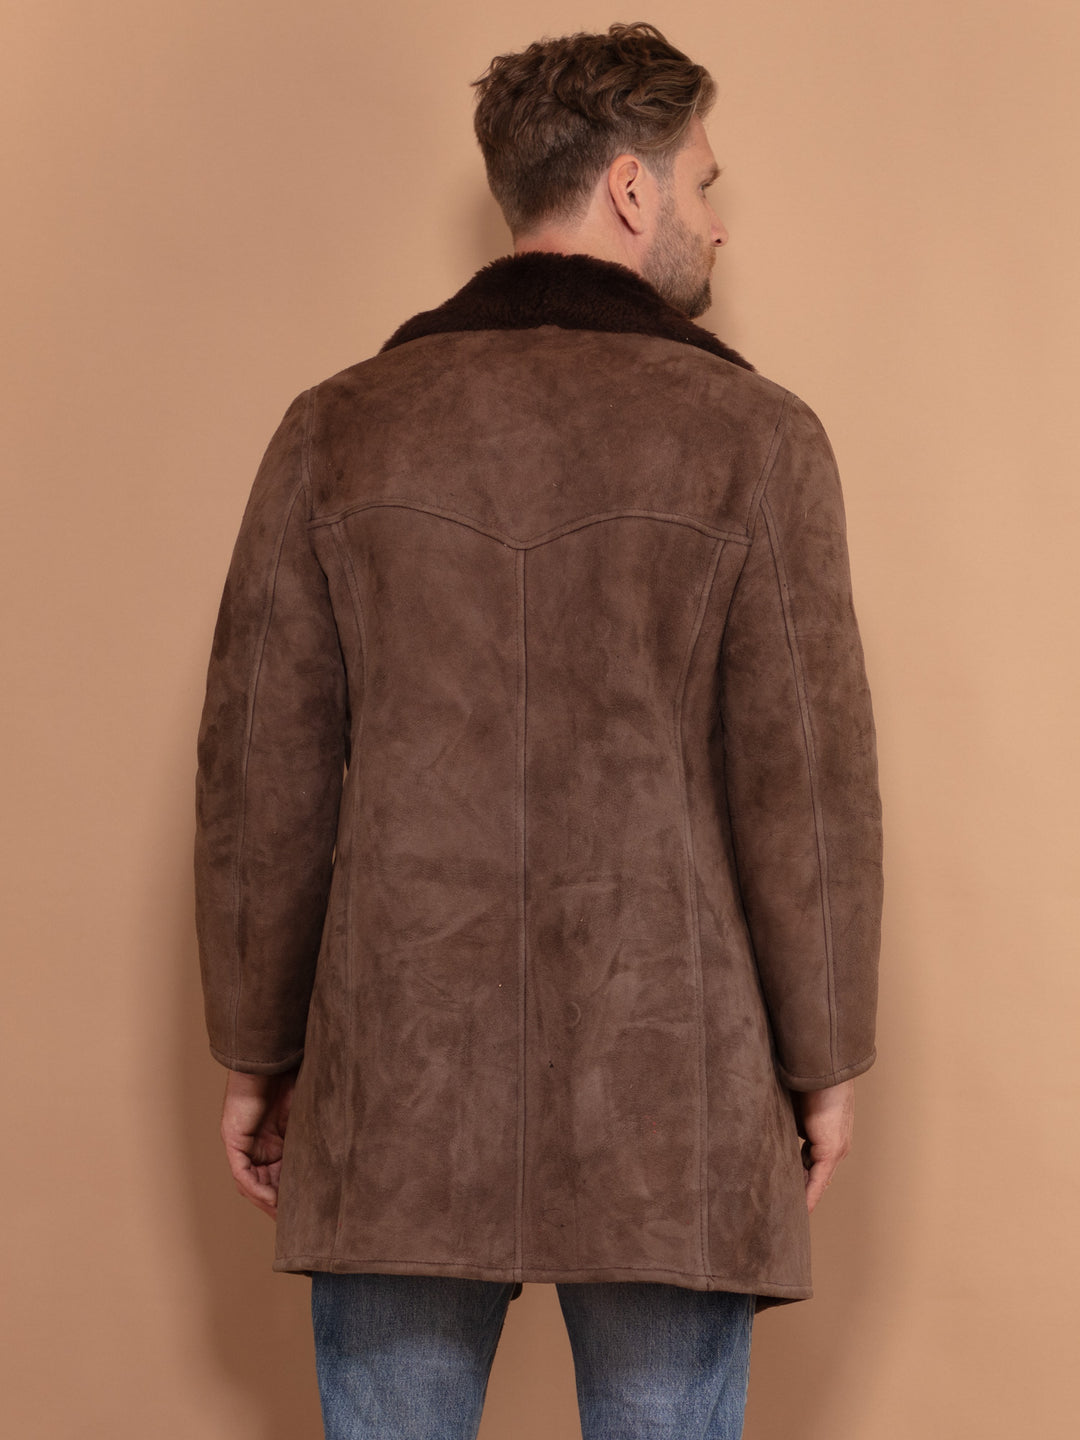 Dark Brown Sheepskin Coat 70's, Size Small, Vintage Men Western Style Coat, Double Breasted Suede Coat, Retro 70s Clothing, Winter Outerwear